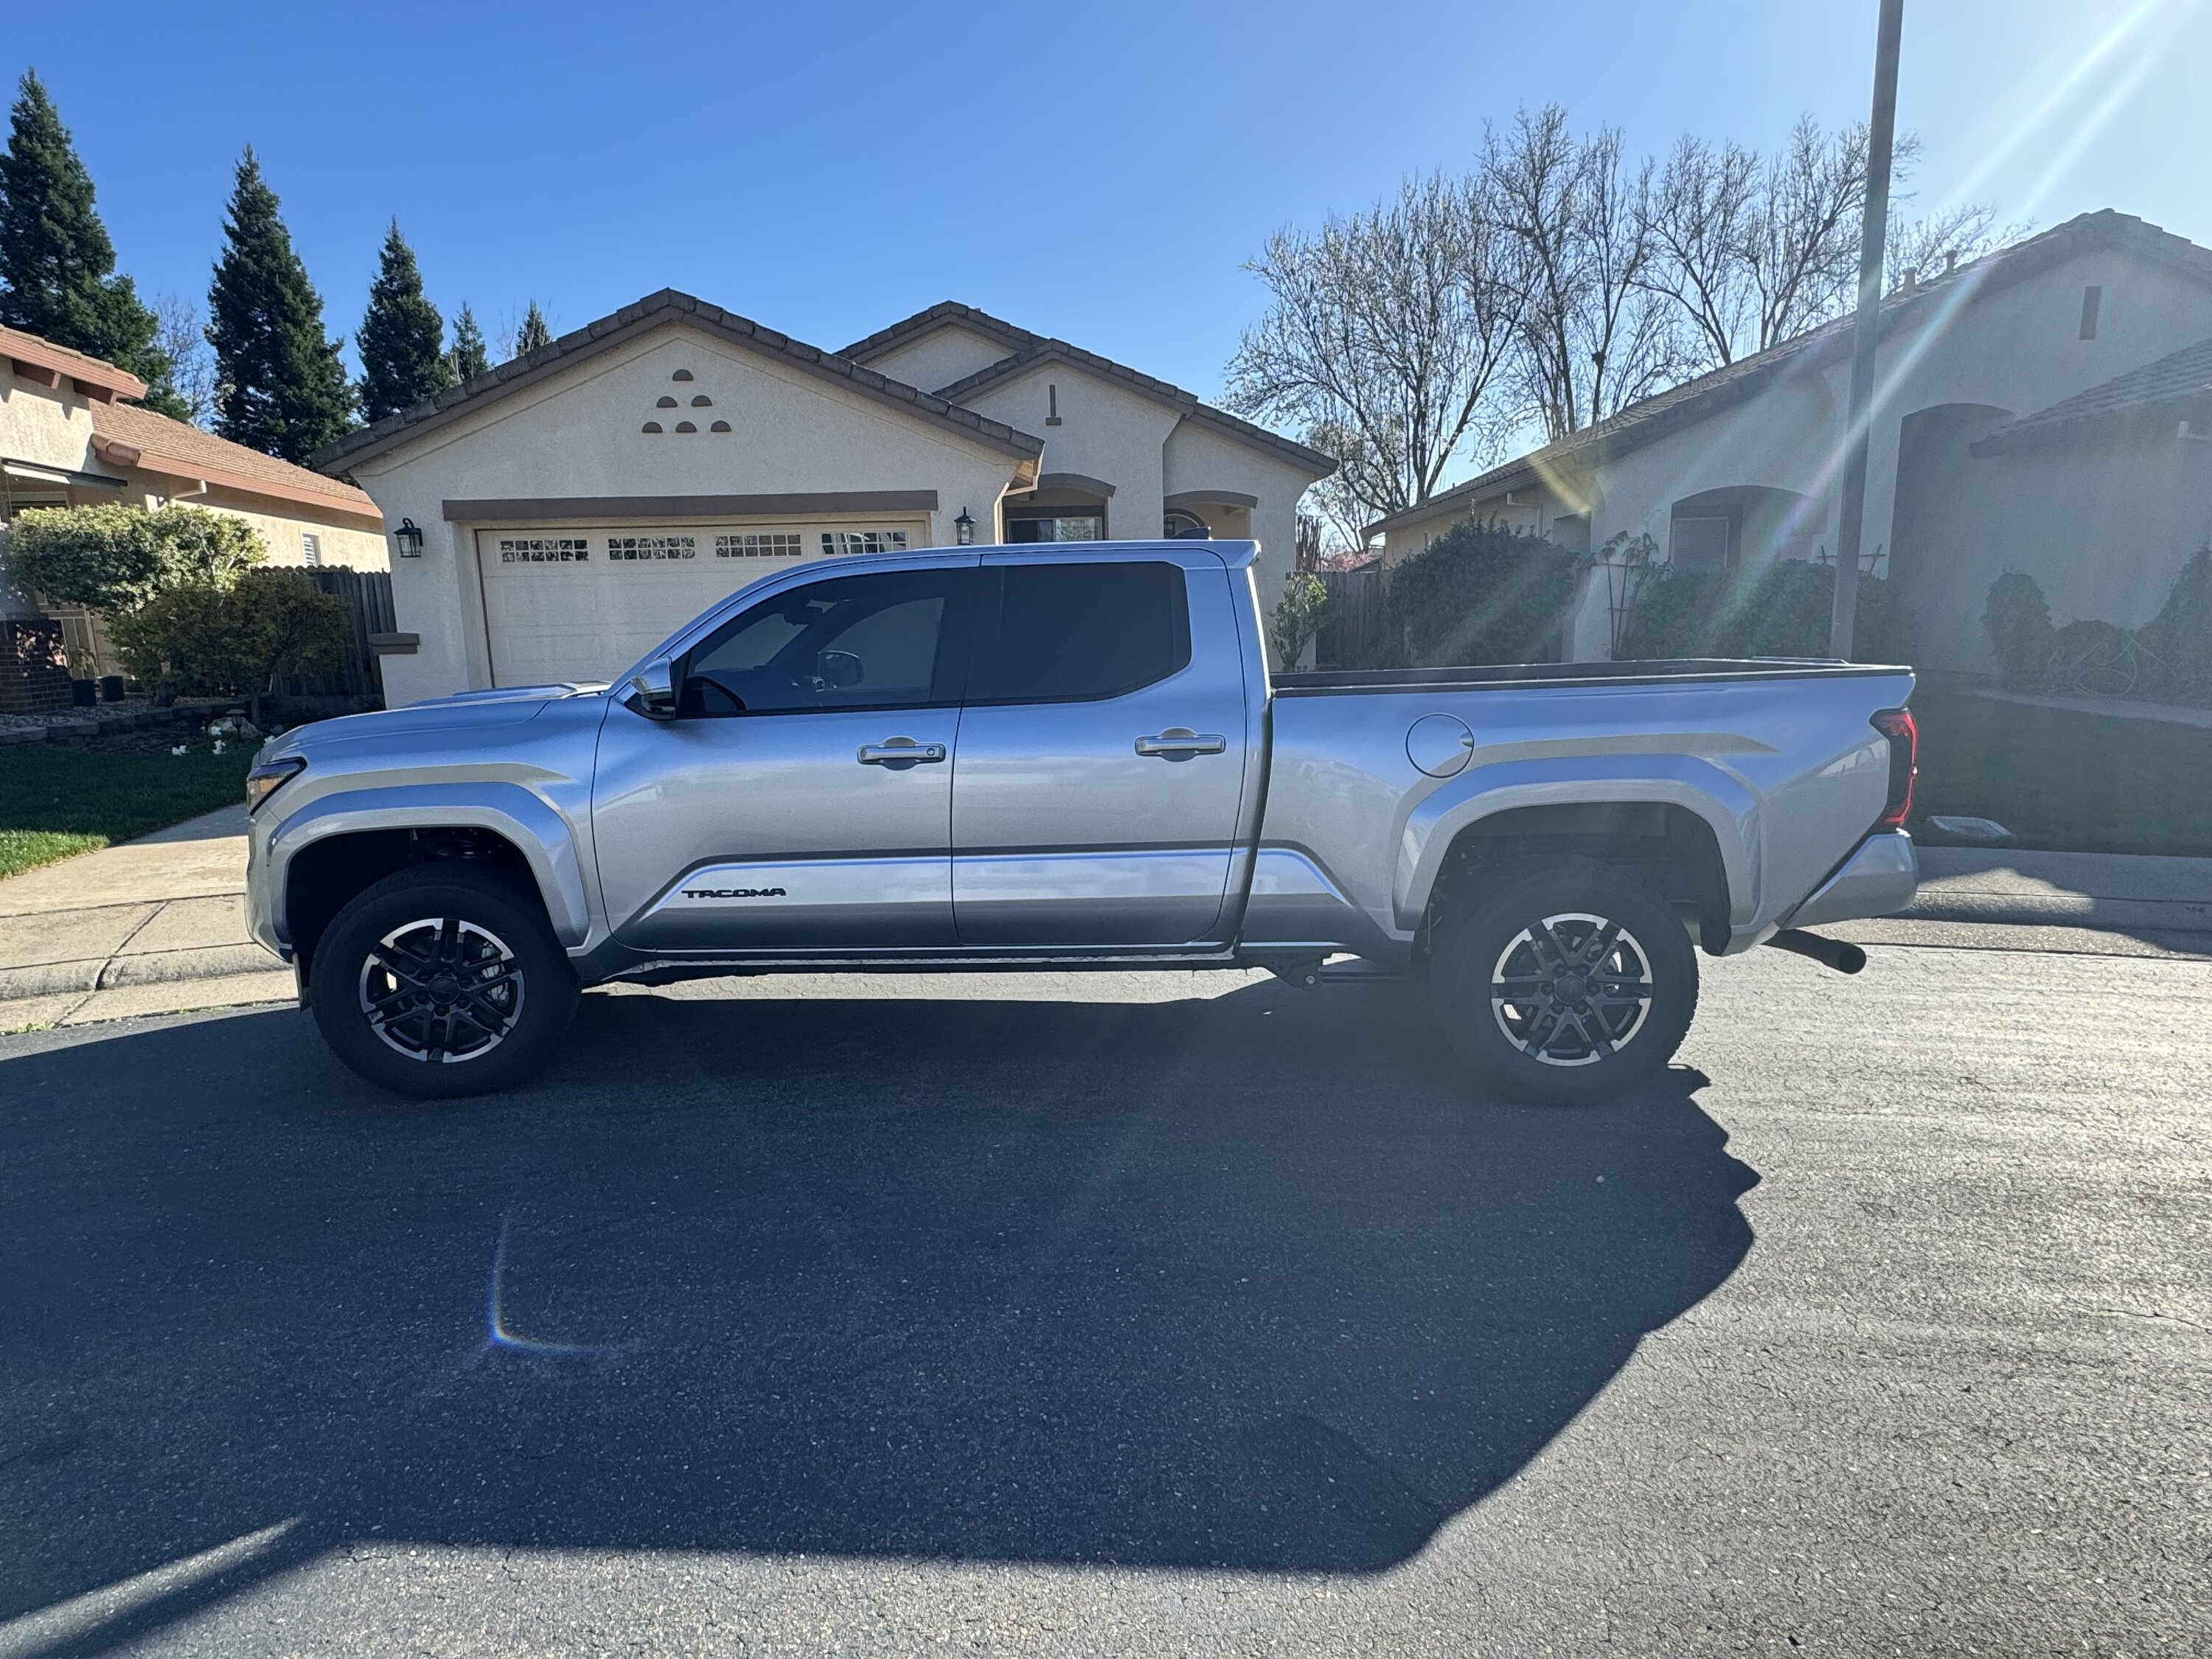 2024 Tacoma 20% Ceramic Tint on front windows to match factory rear window tints IMG_1262